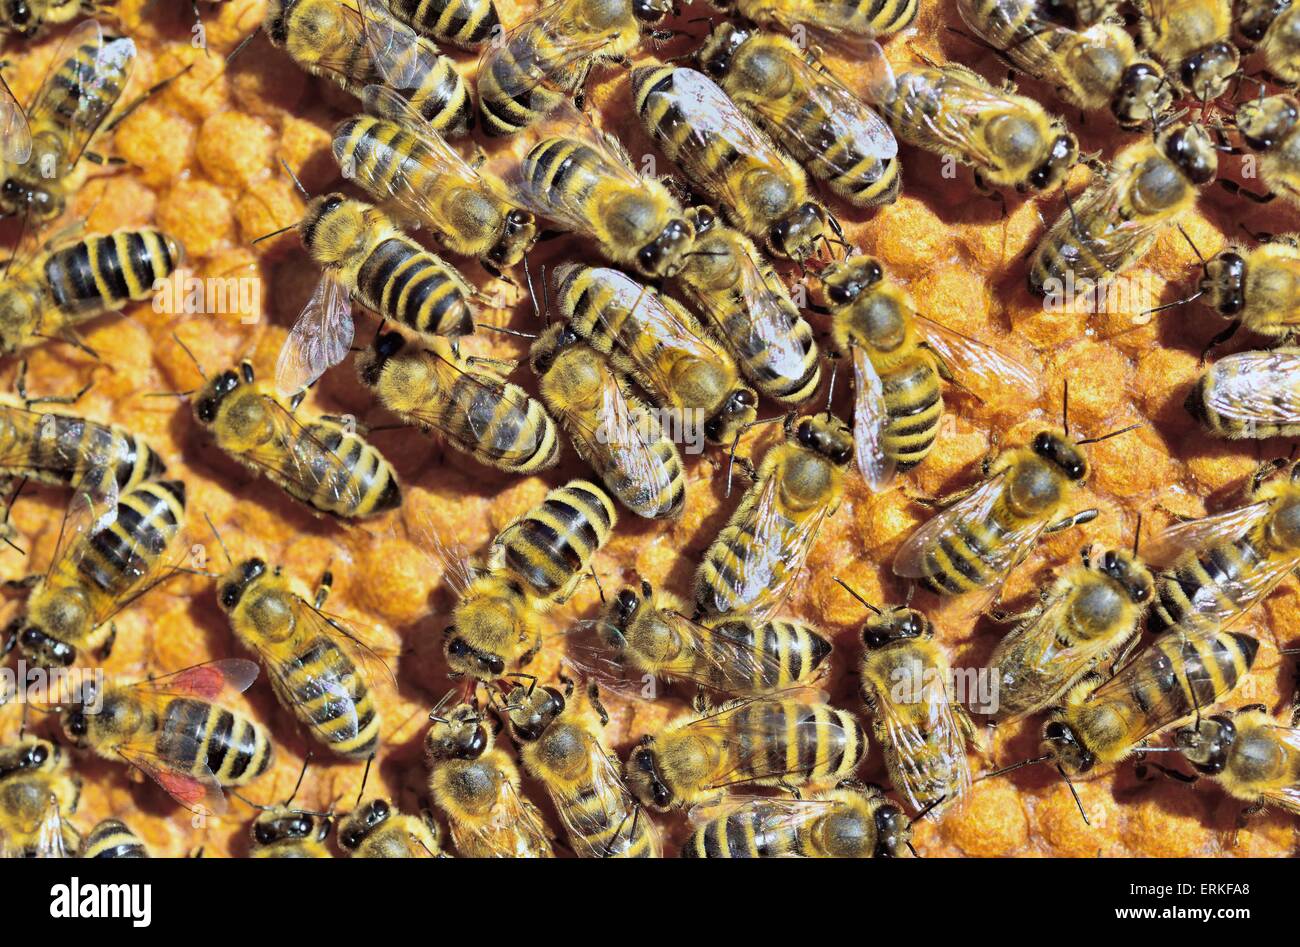 European Honey Bees (Apis mellifera var. carnica) on honeycomb with capped brood cells, Bavaria, Germany Stock Photo